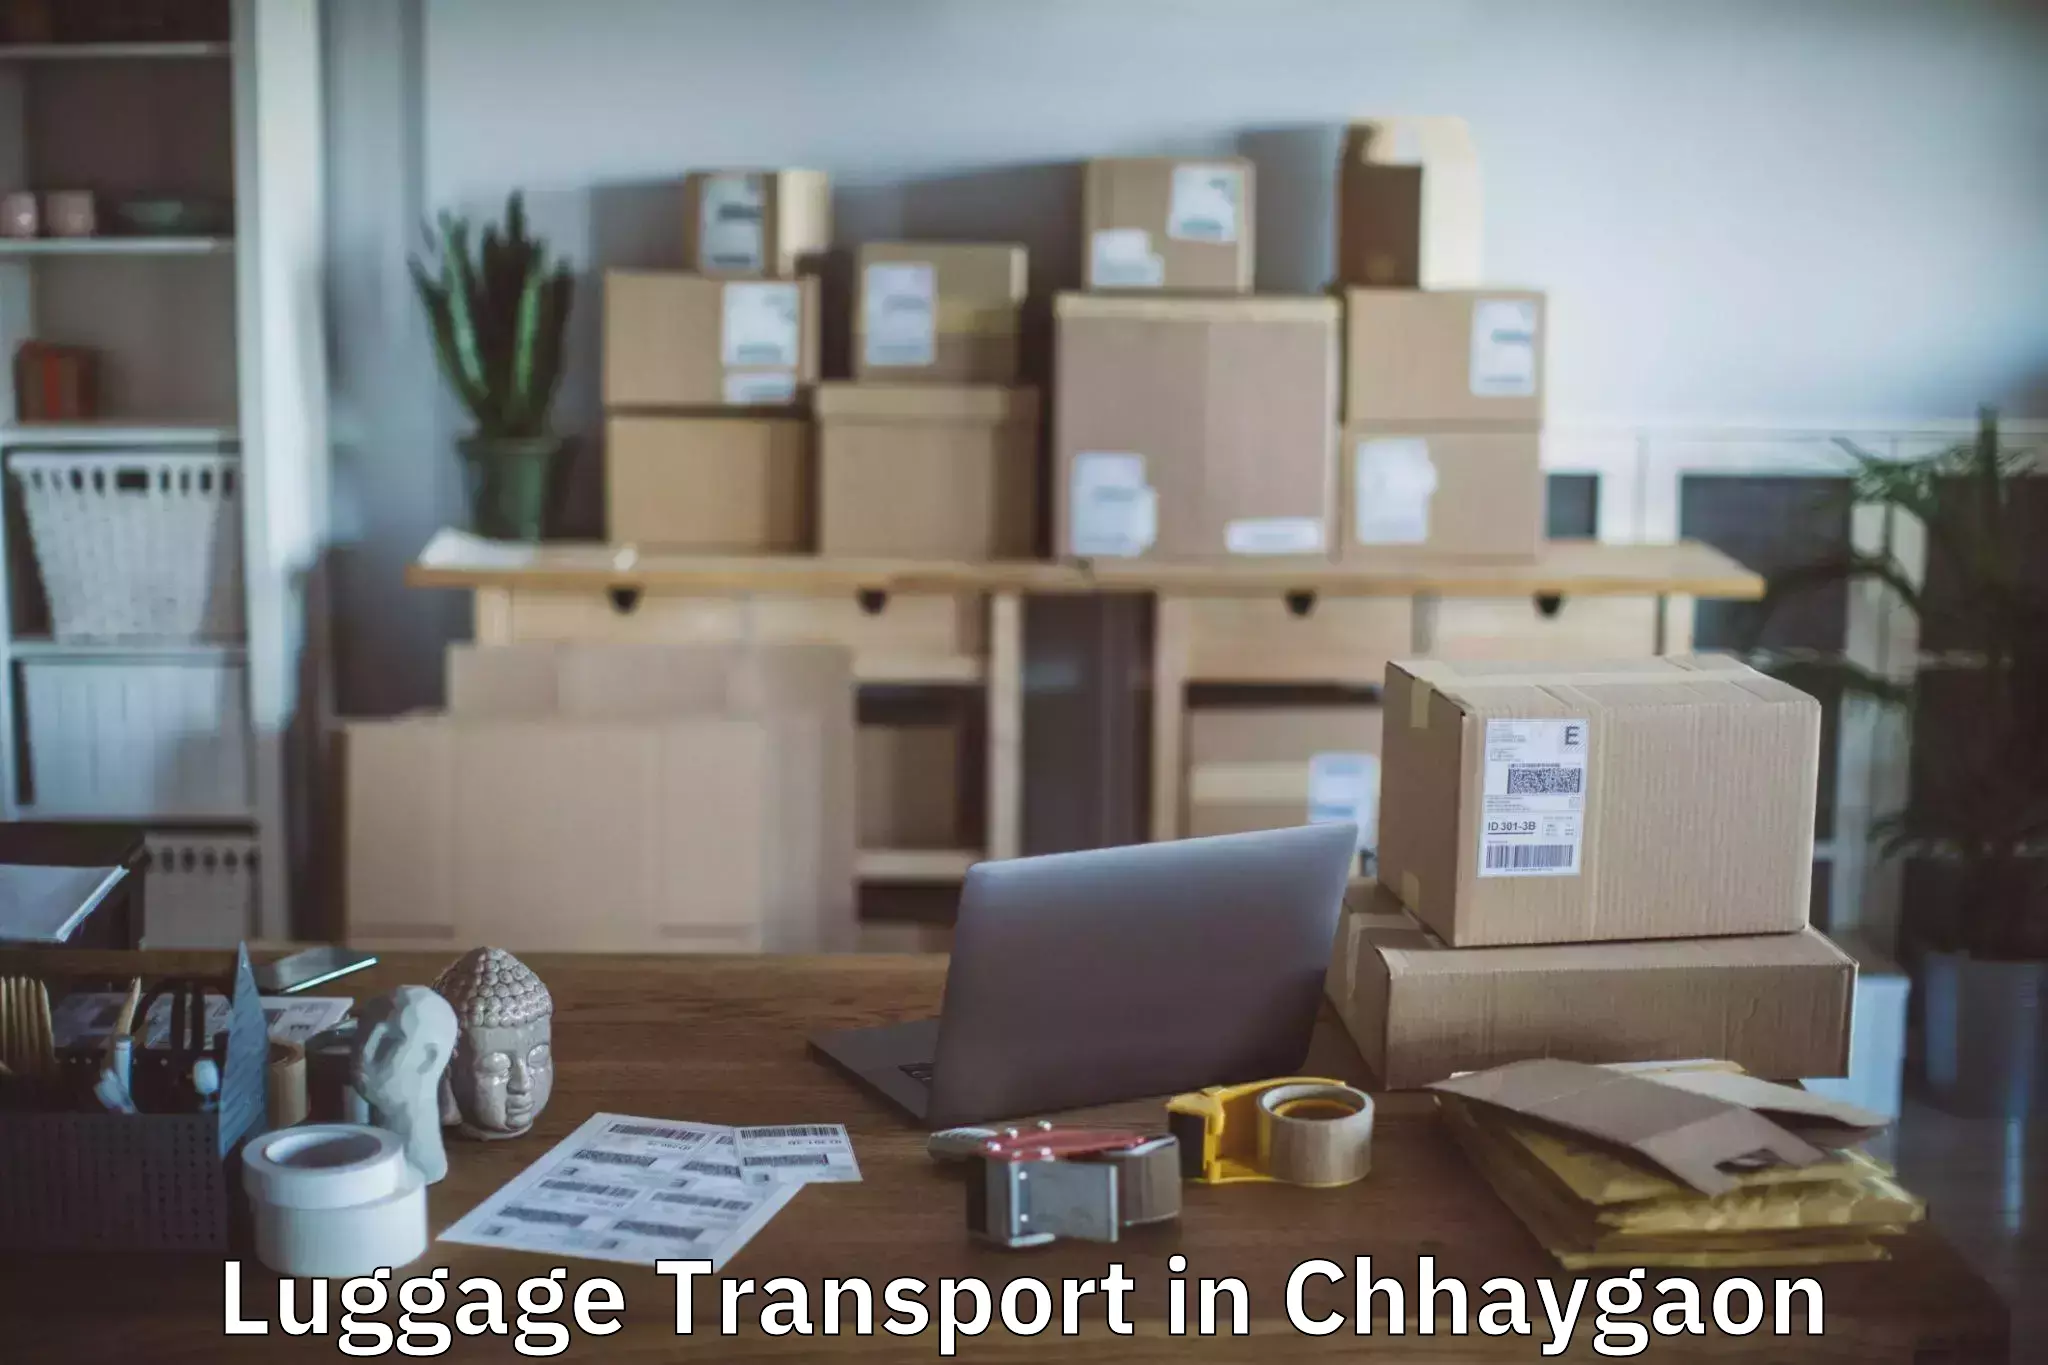 Luggage transit service in Chhaygaon